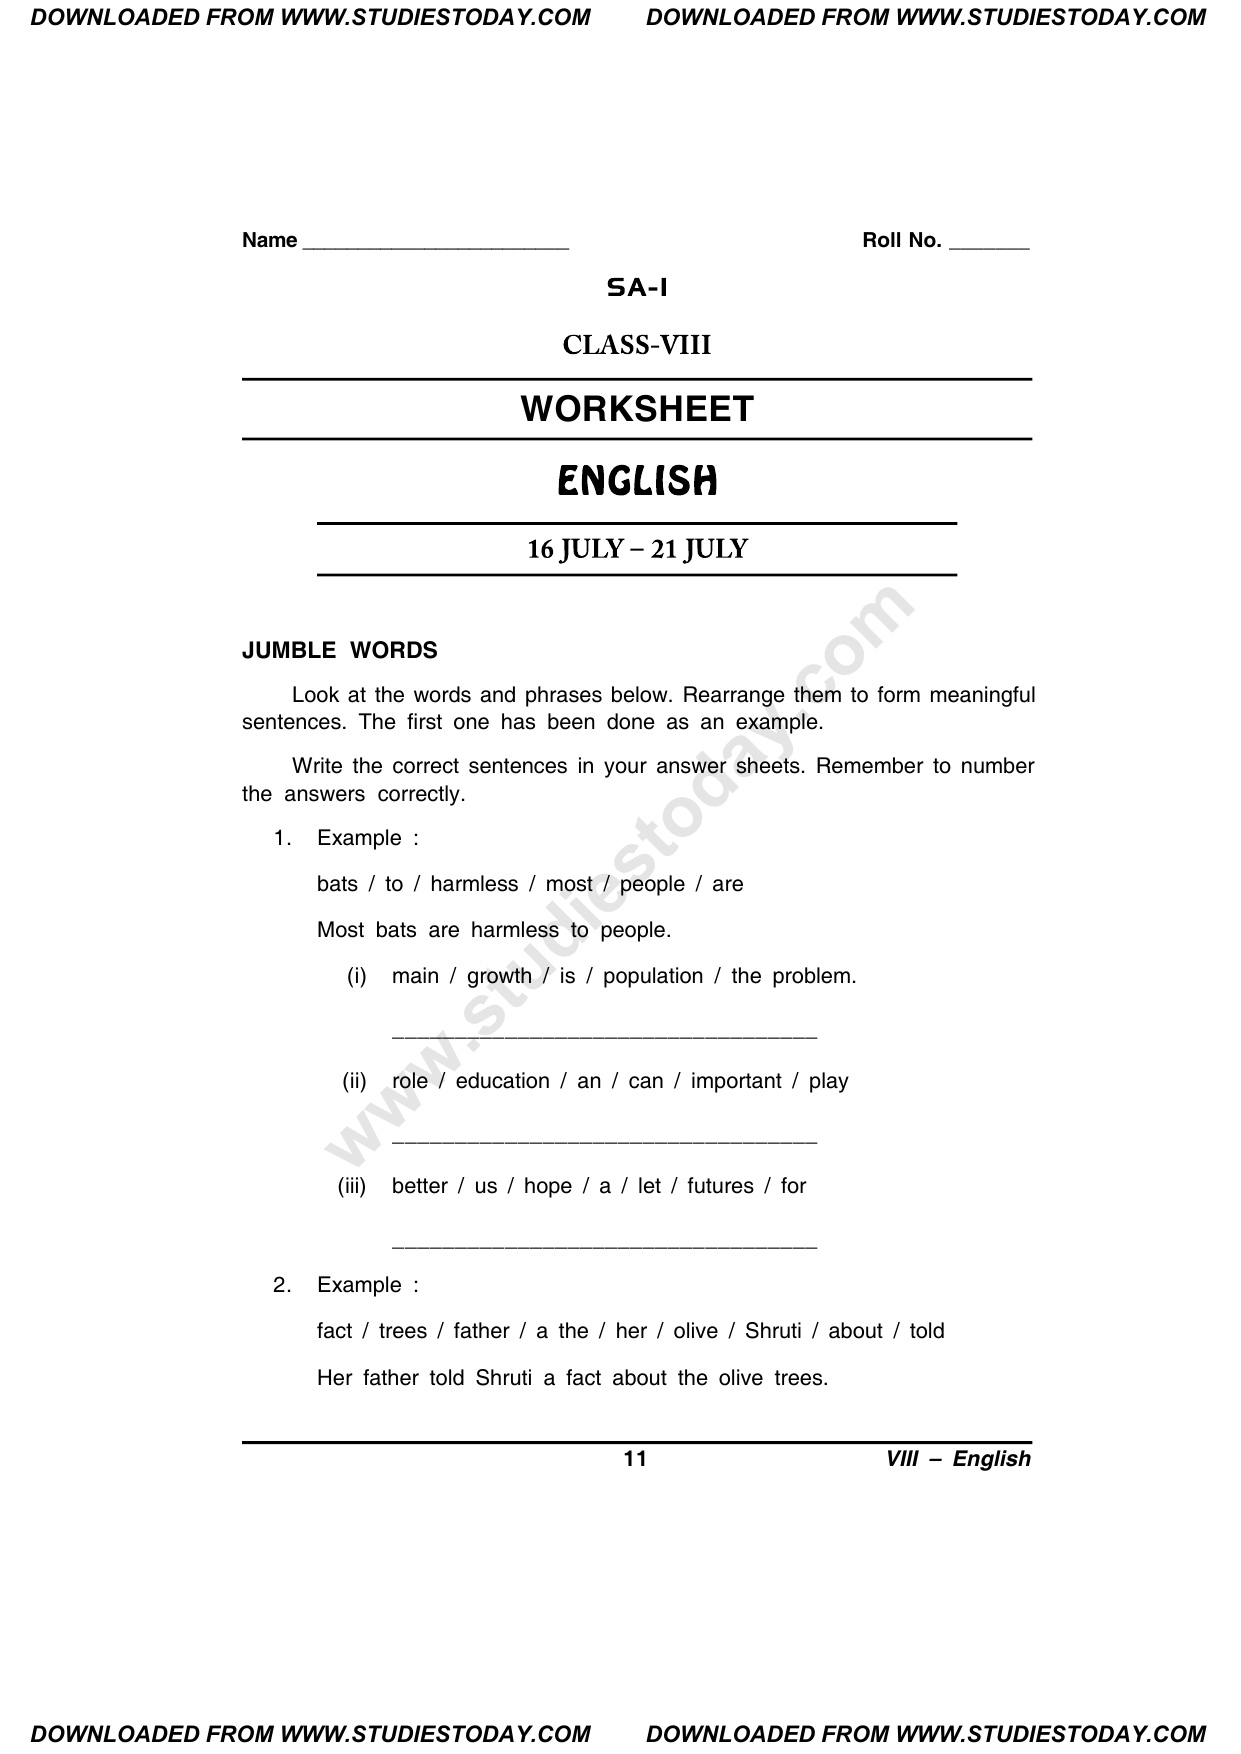 English Worksheet For Class 8 Cbse